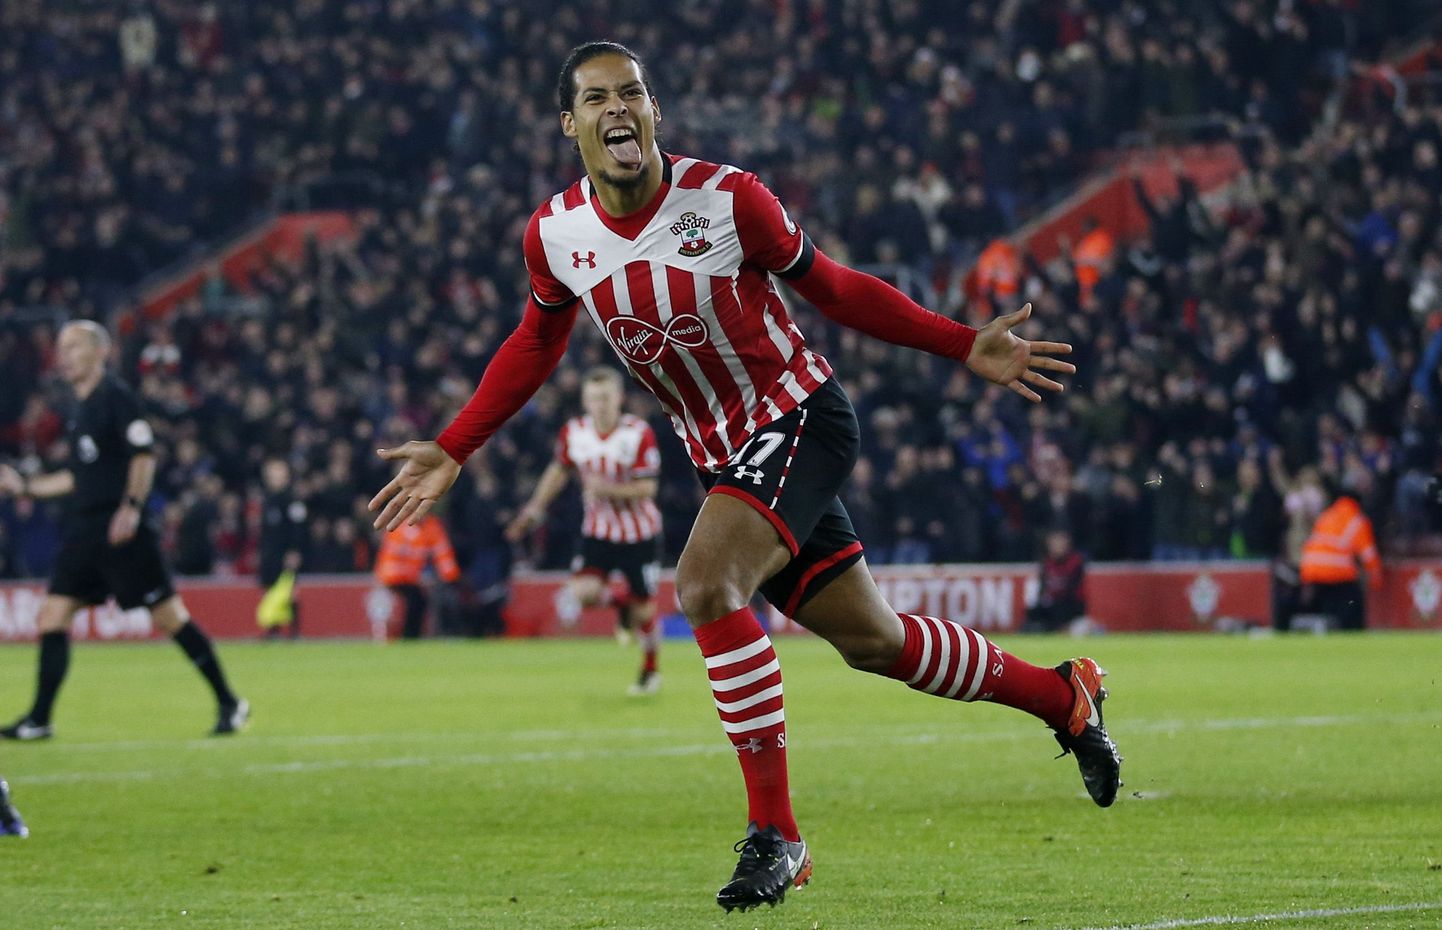 Britain Soccer Football - Southampton v Tottenham Hotspur - Premier League - St Mary's Stadium - 28/12/16 Southampton's Virgil van Dijk celebrates scoring their first goal  Action Images via Reuters / Matthew Childs Livepic EDITORIAL USE ONLY. No use with unauthorized audio, video, data, fixture lists, club/league logos or "live" services. Online in-match use limited to 45 images, no video emulation. No use in betting, games or single club/league/player publications. Please contact your account representative for further details.